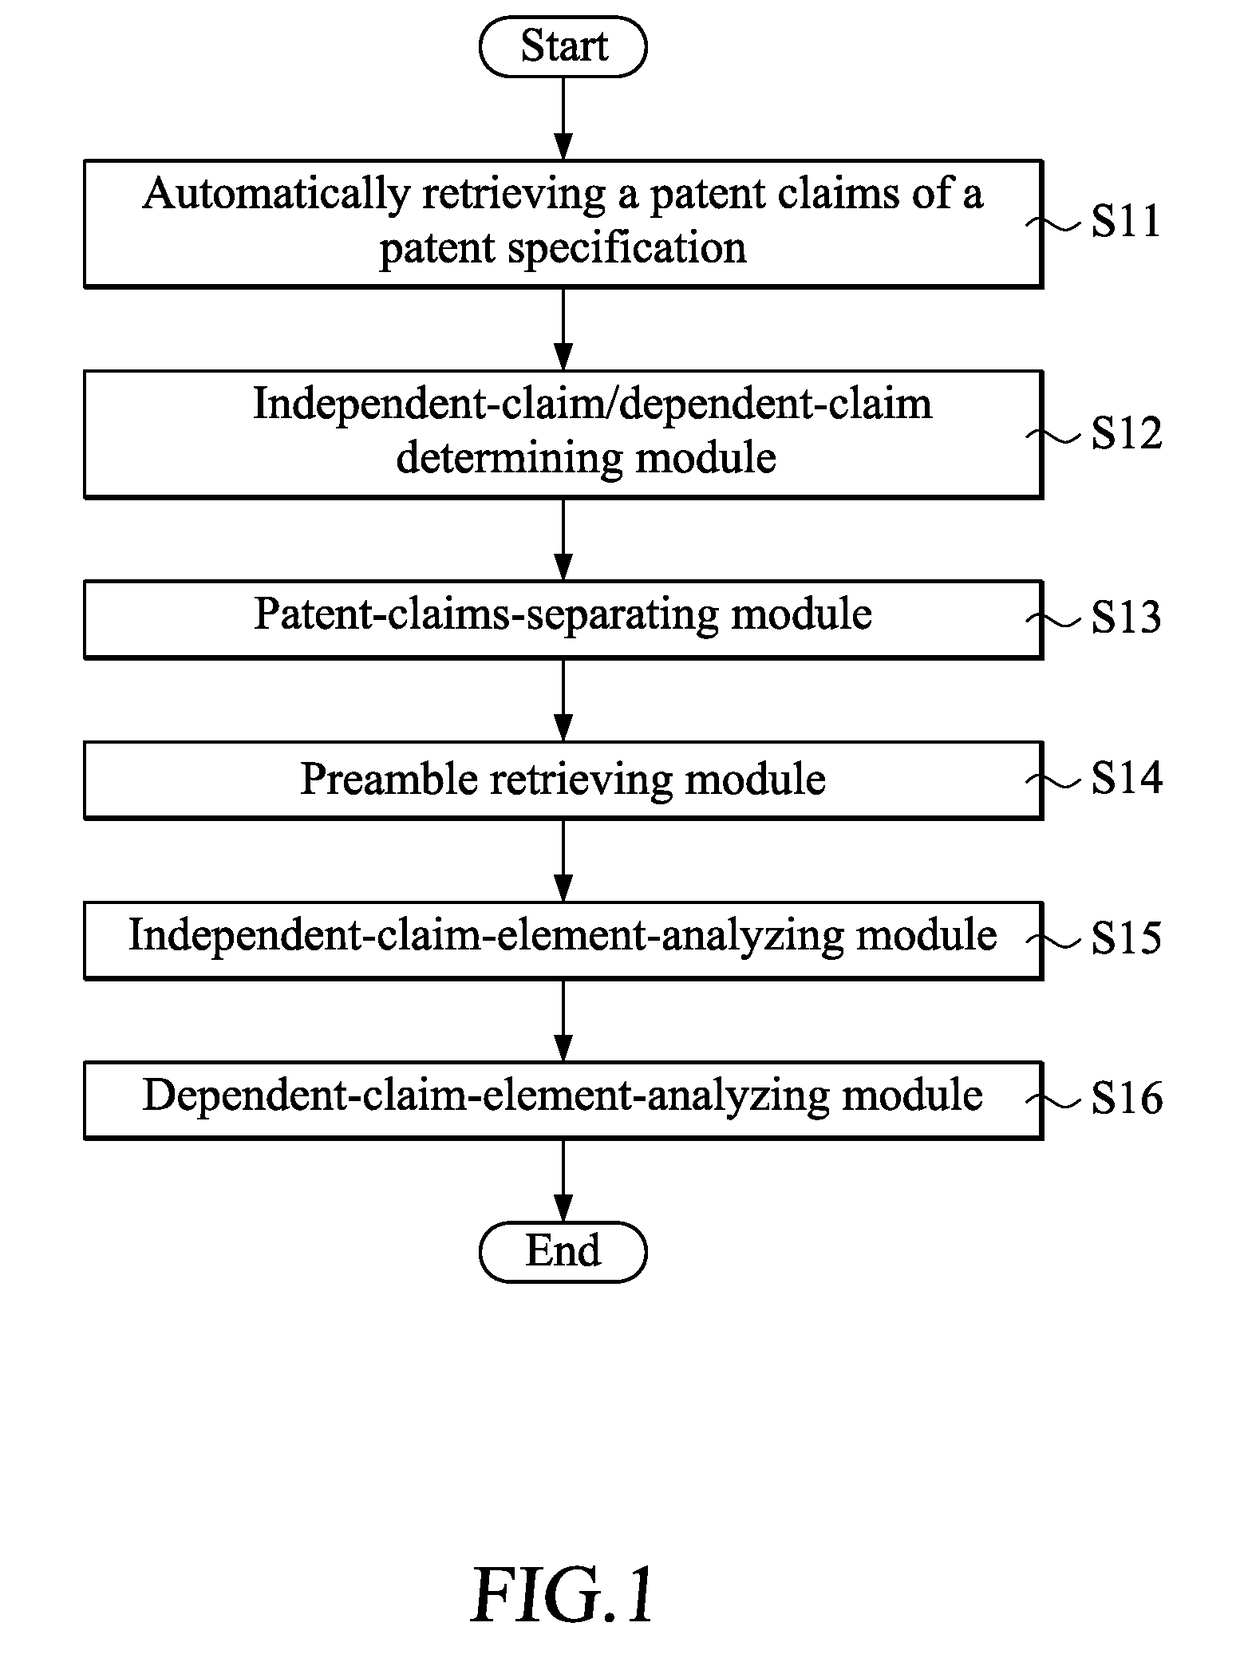 Patent claims disassembling and analyzing method